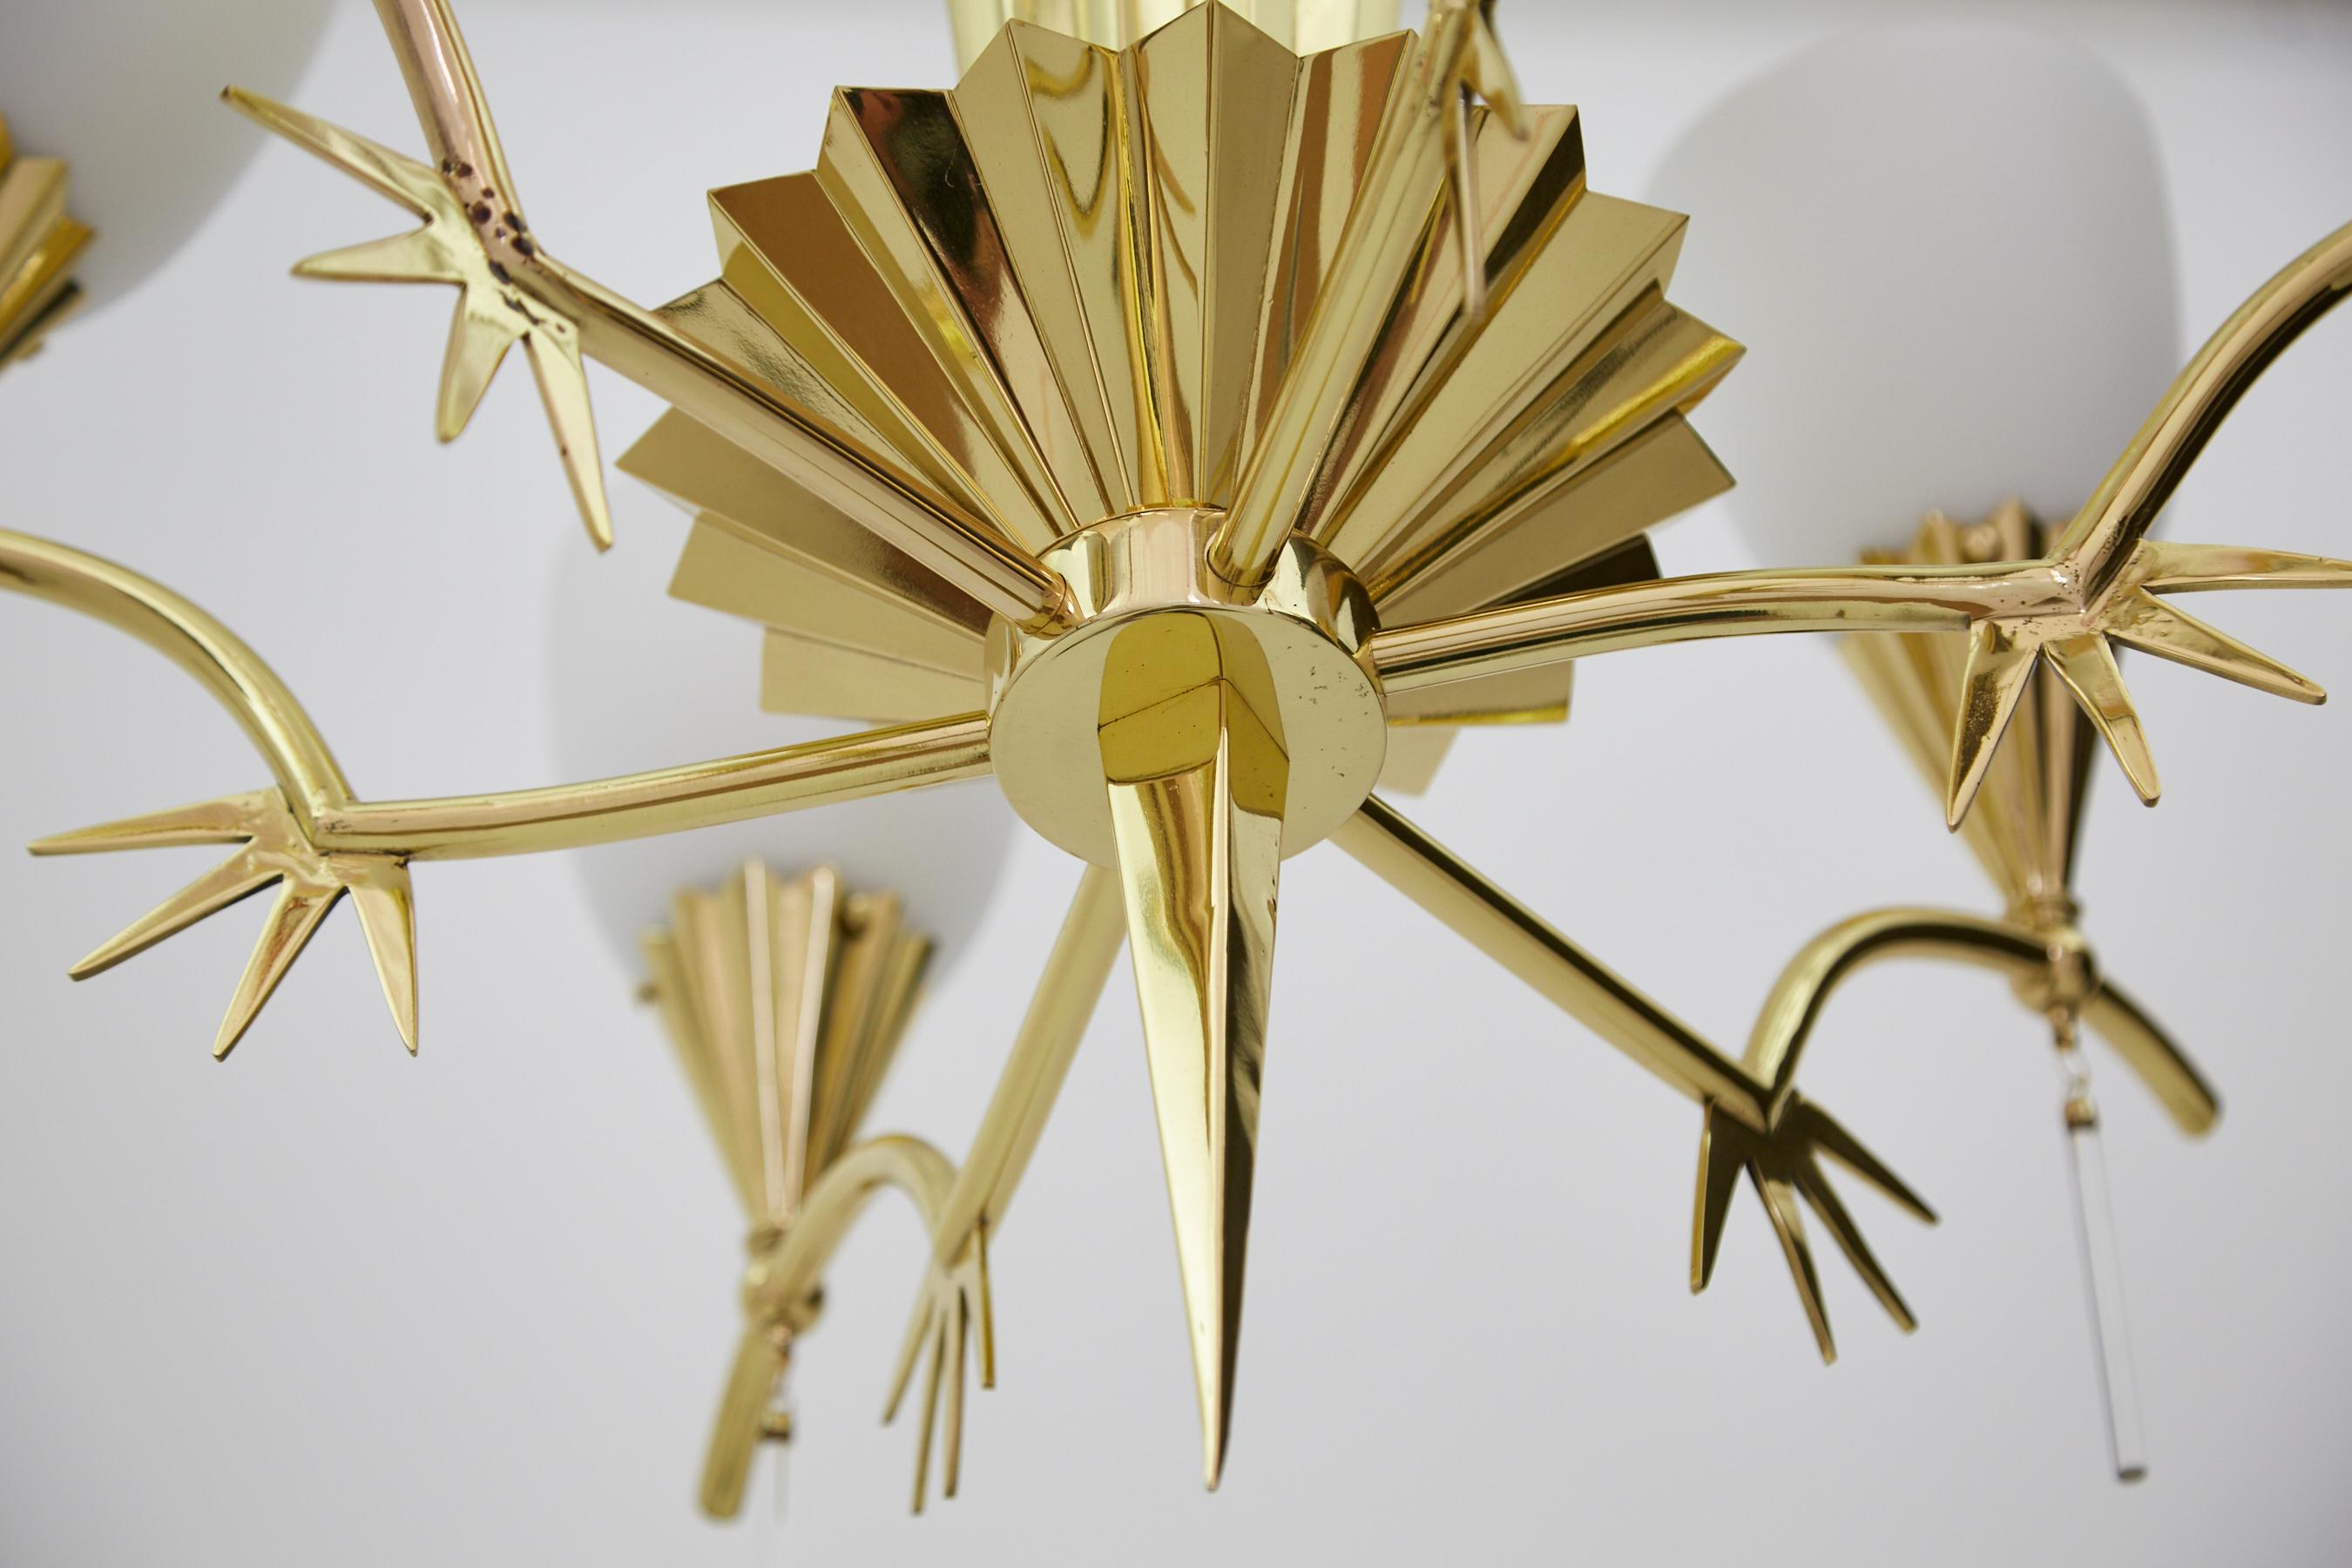 Six-Arm Italian Brass Chandelier with Decorative Spikes, 1940s For Sale 3